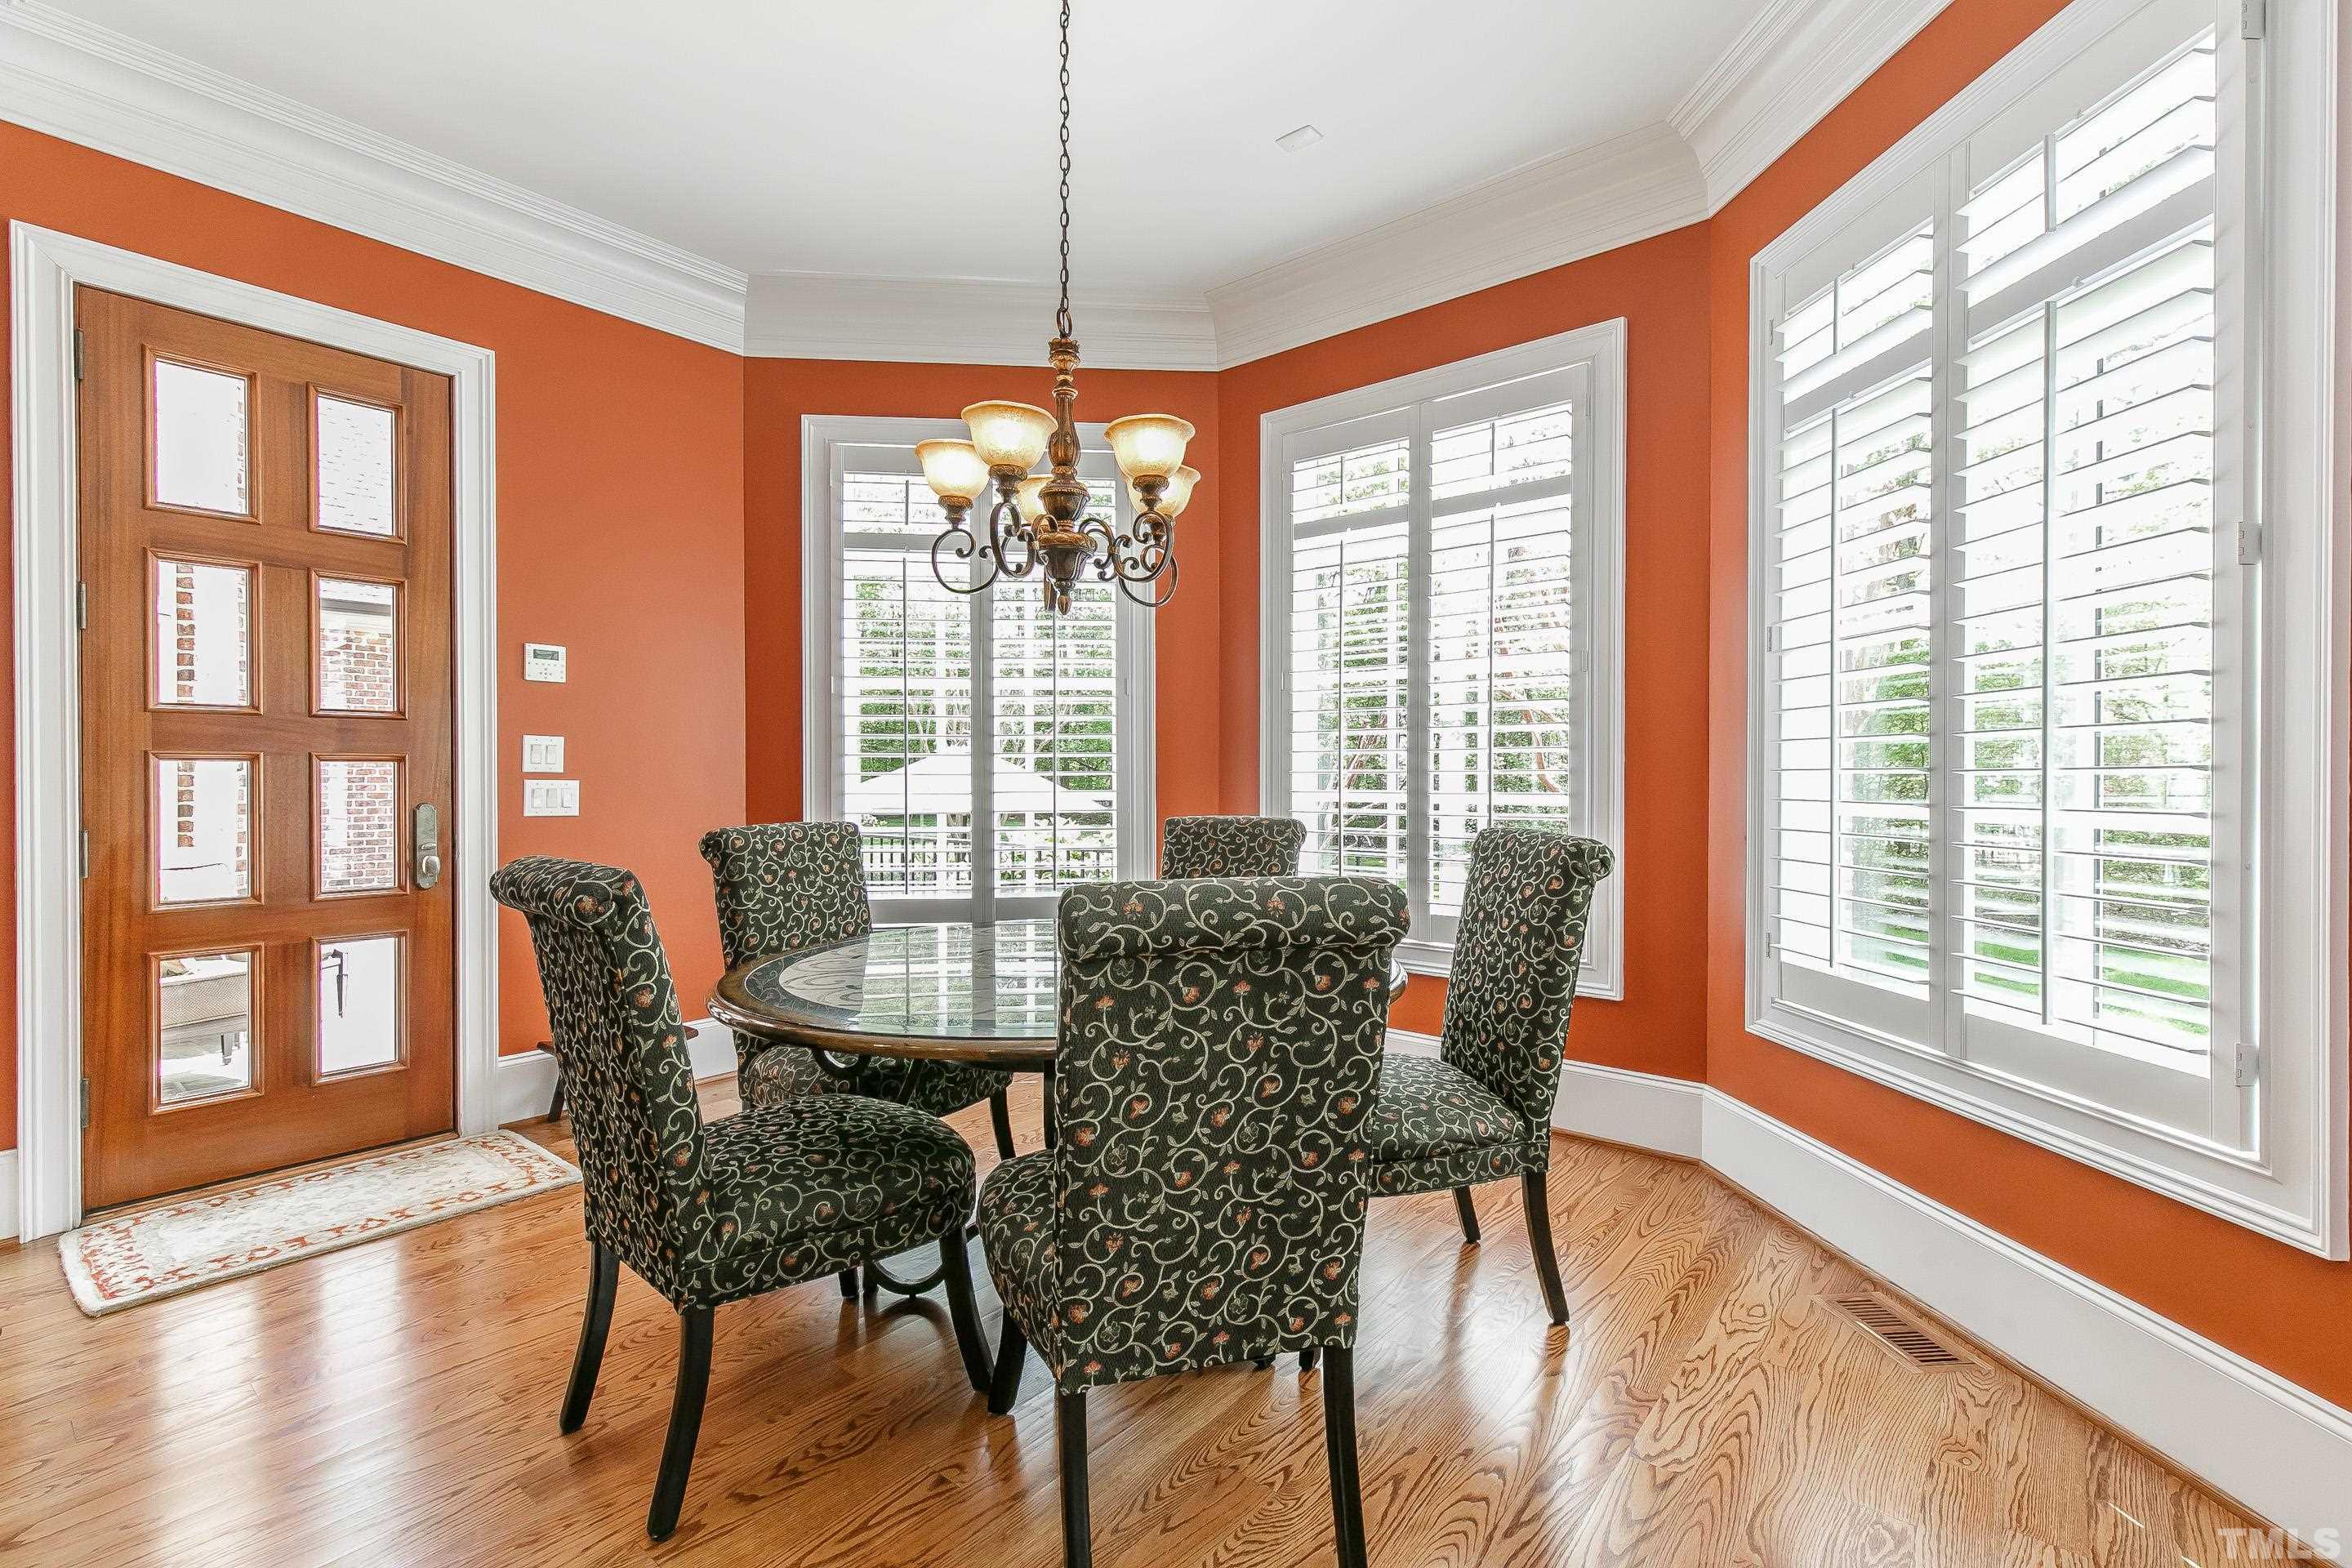 Bright windows and plantation shutters